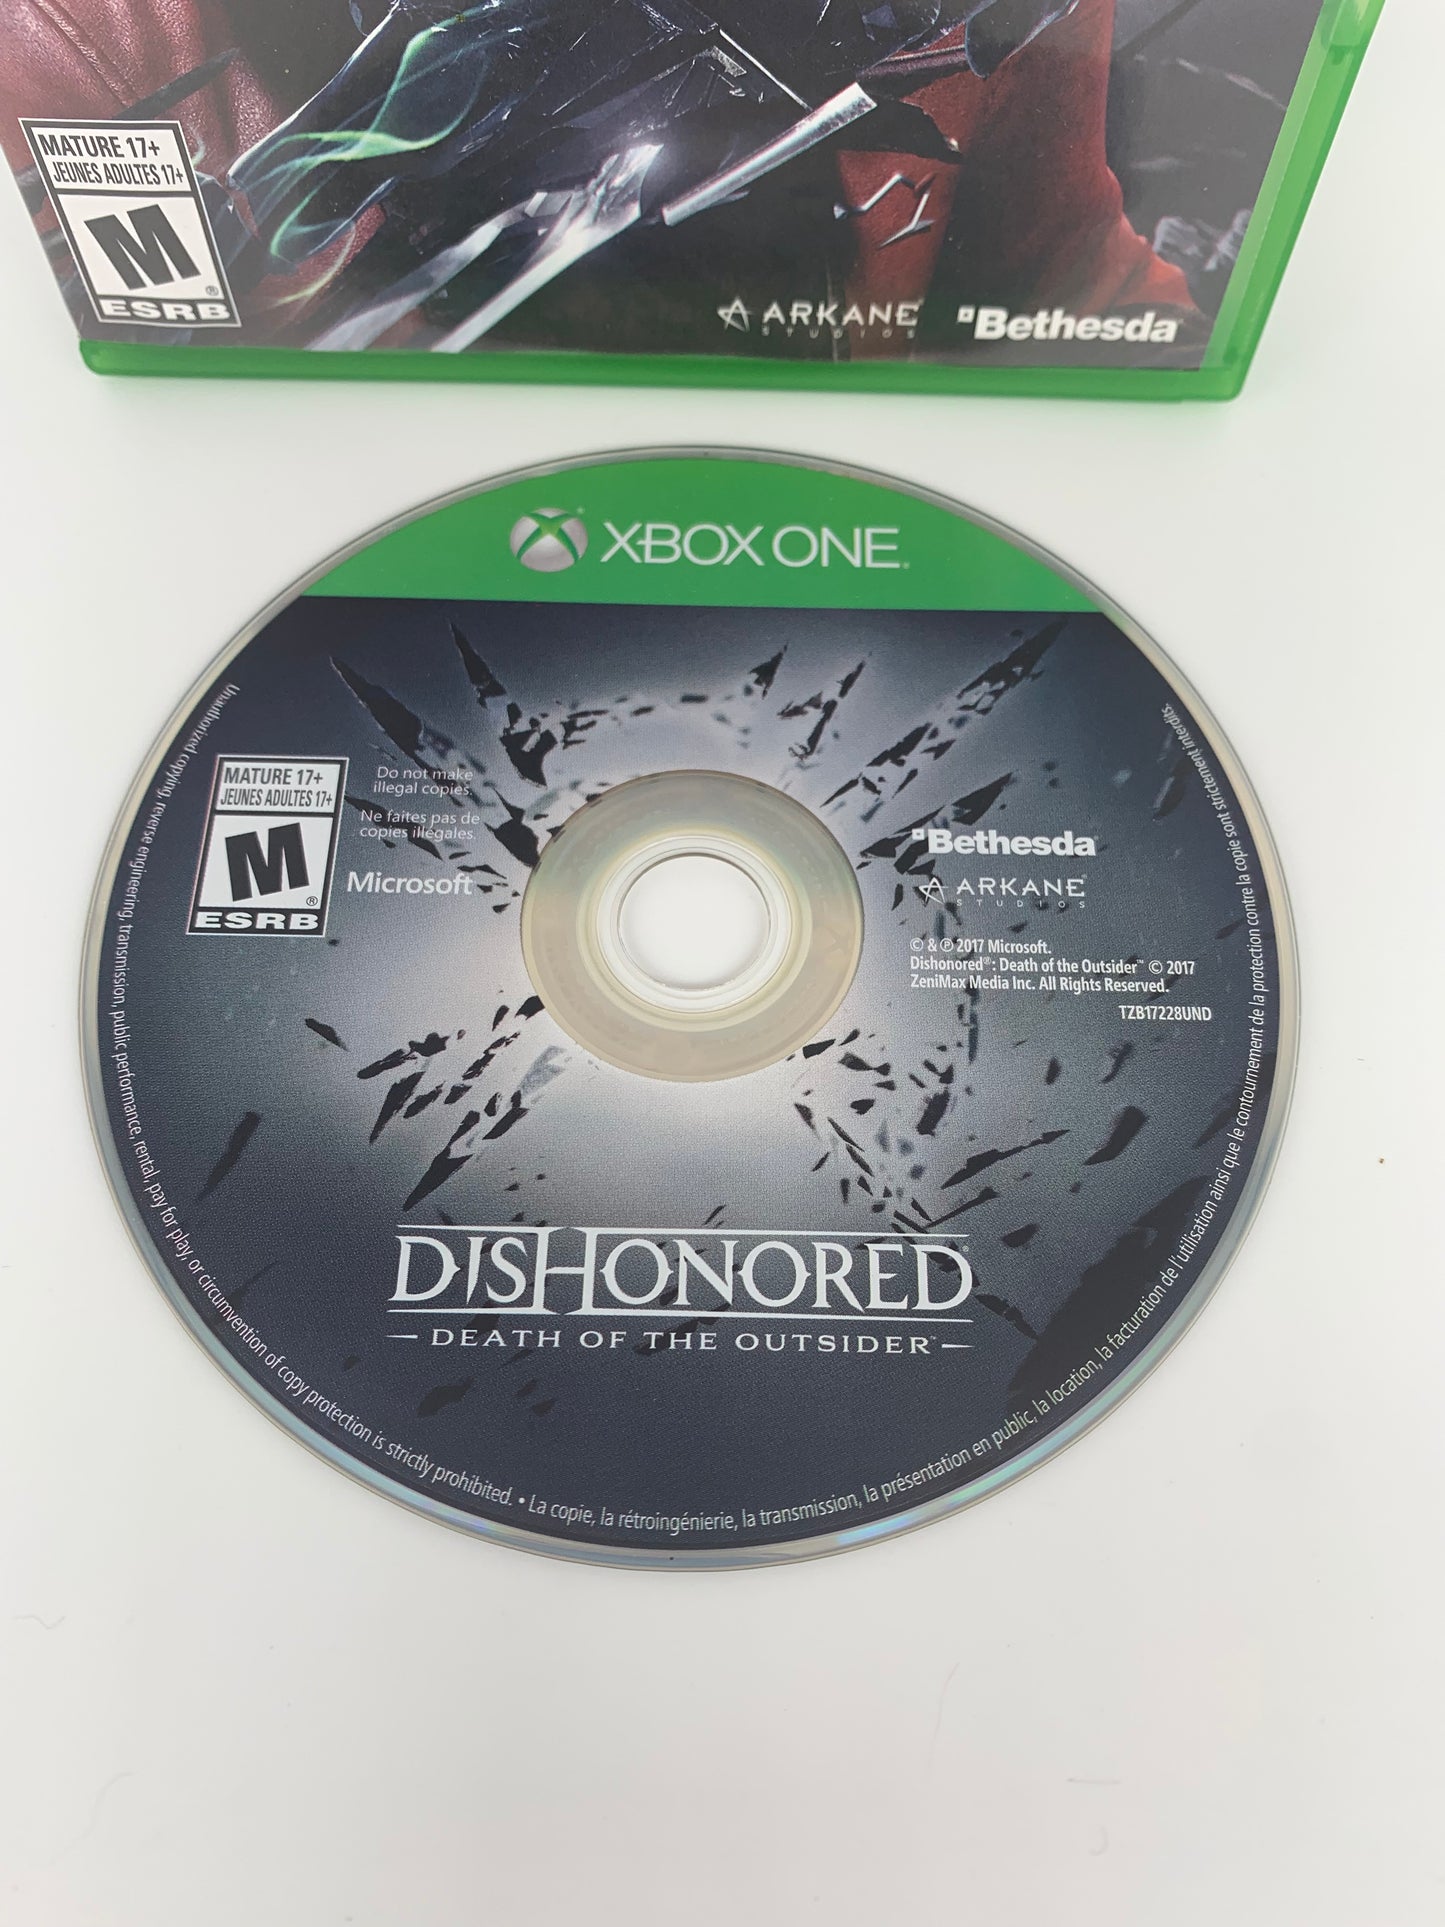 MiCROSOFT XBOX ONE | DiSHONORED DEATH OF THE OUTSiDER